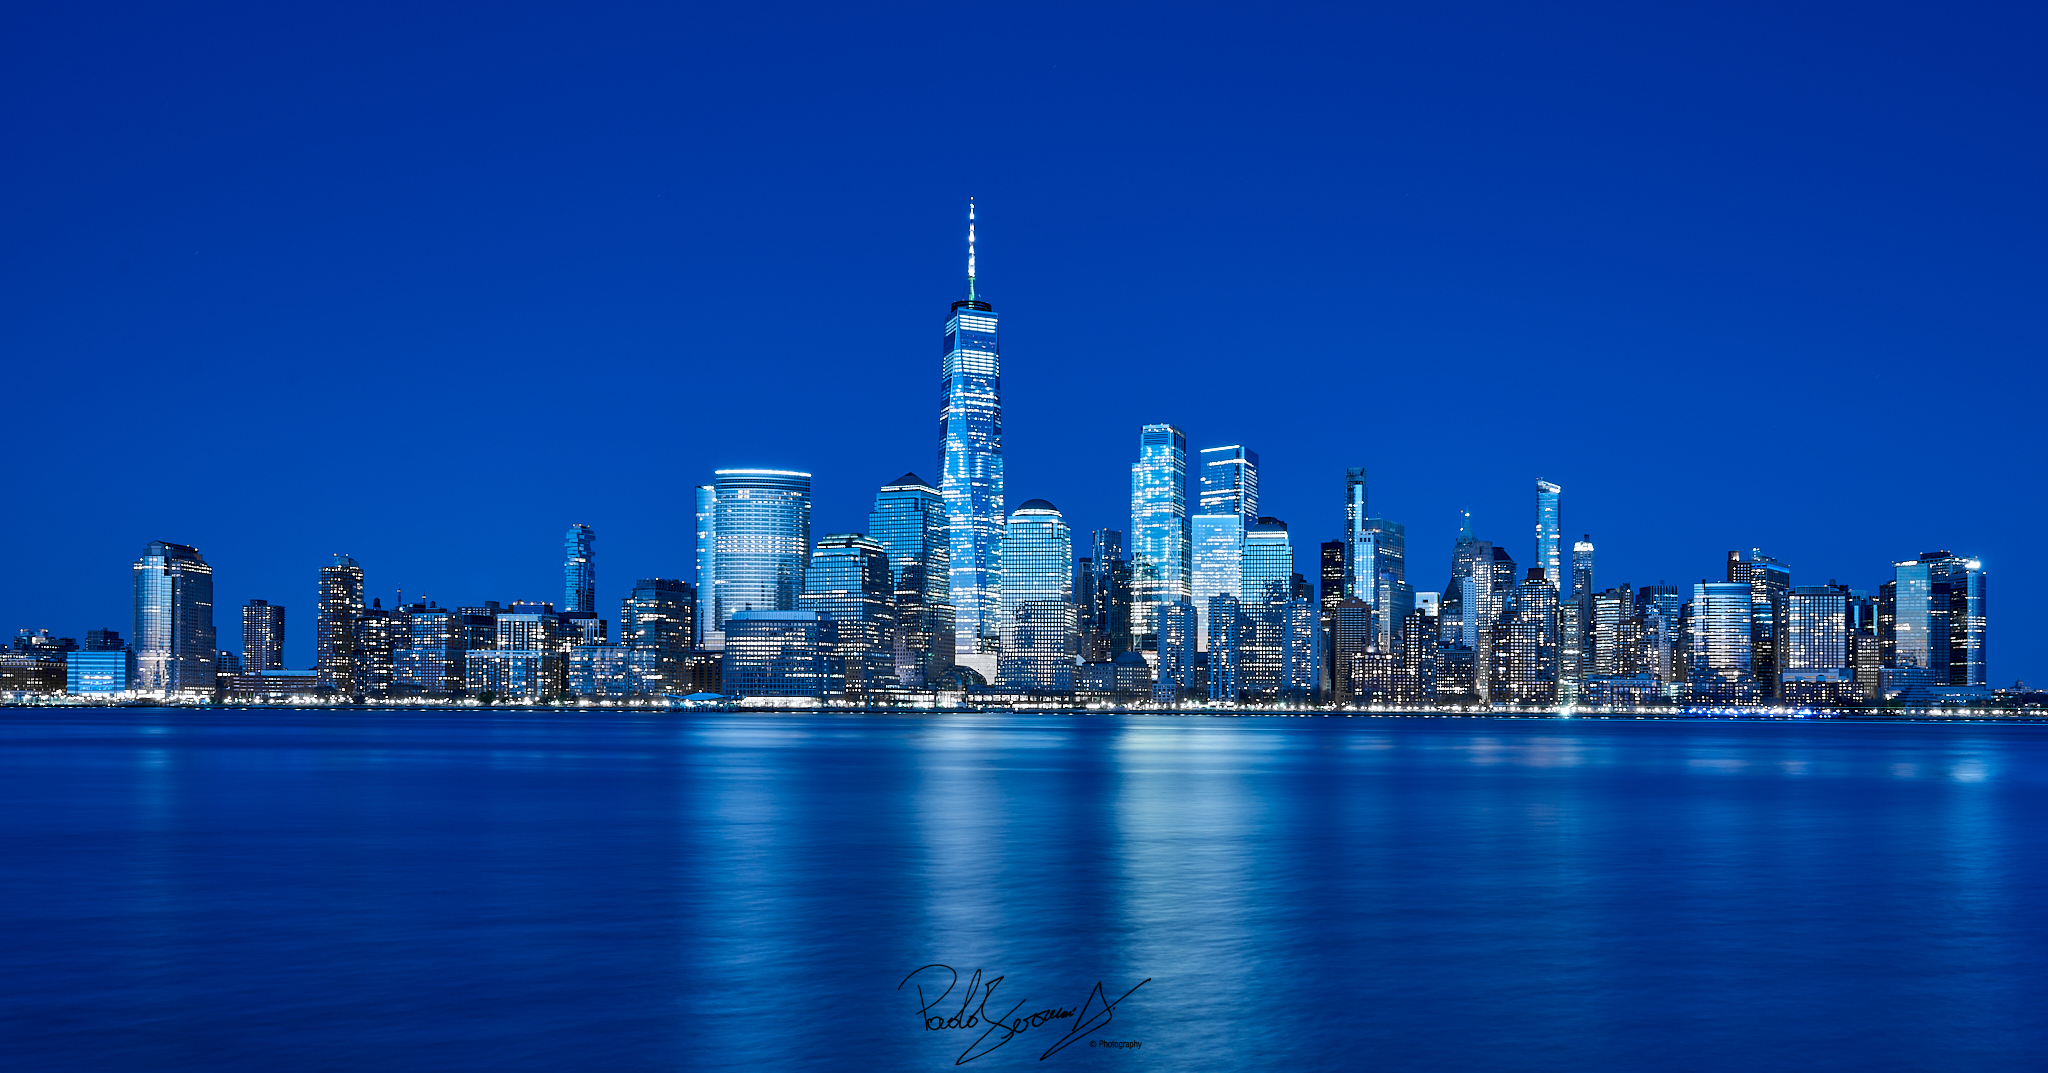 Blue time in New York...